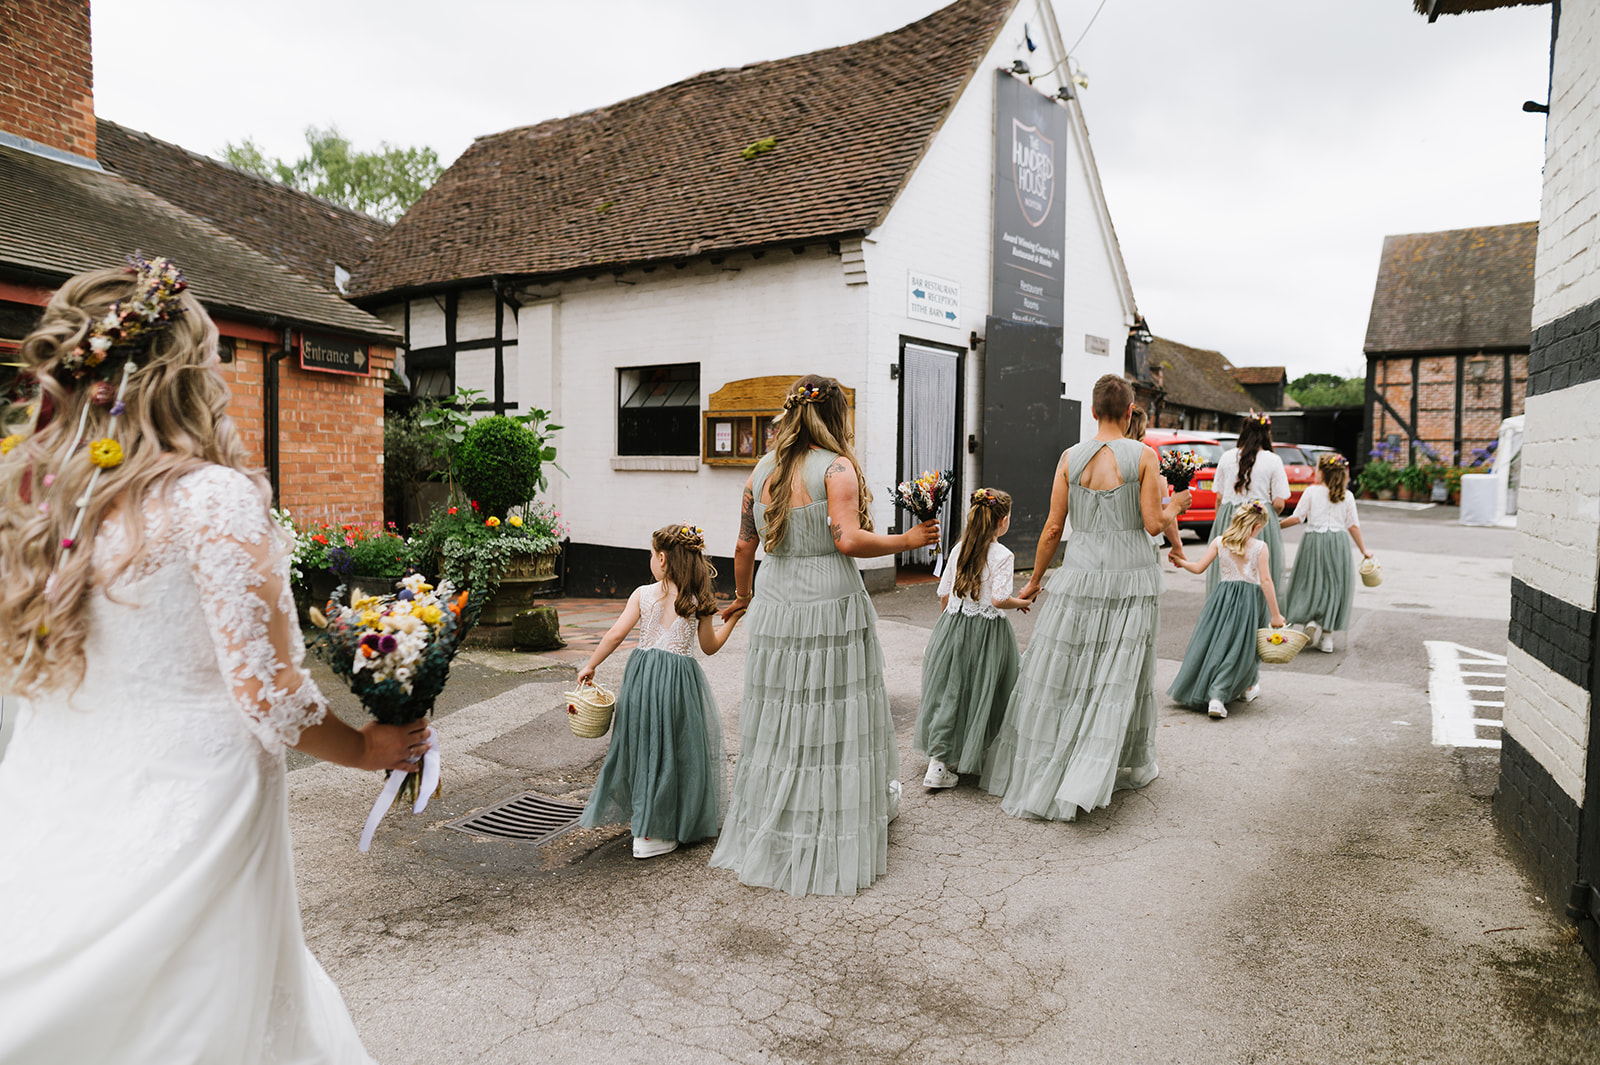 The bride and her bridesmaids crossing the car park at Hundred House Hotel to go to the wedding ceremony